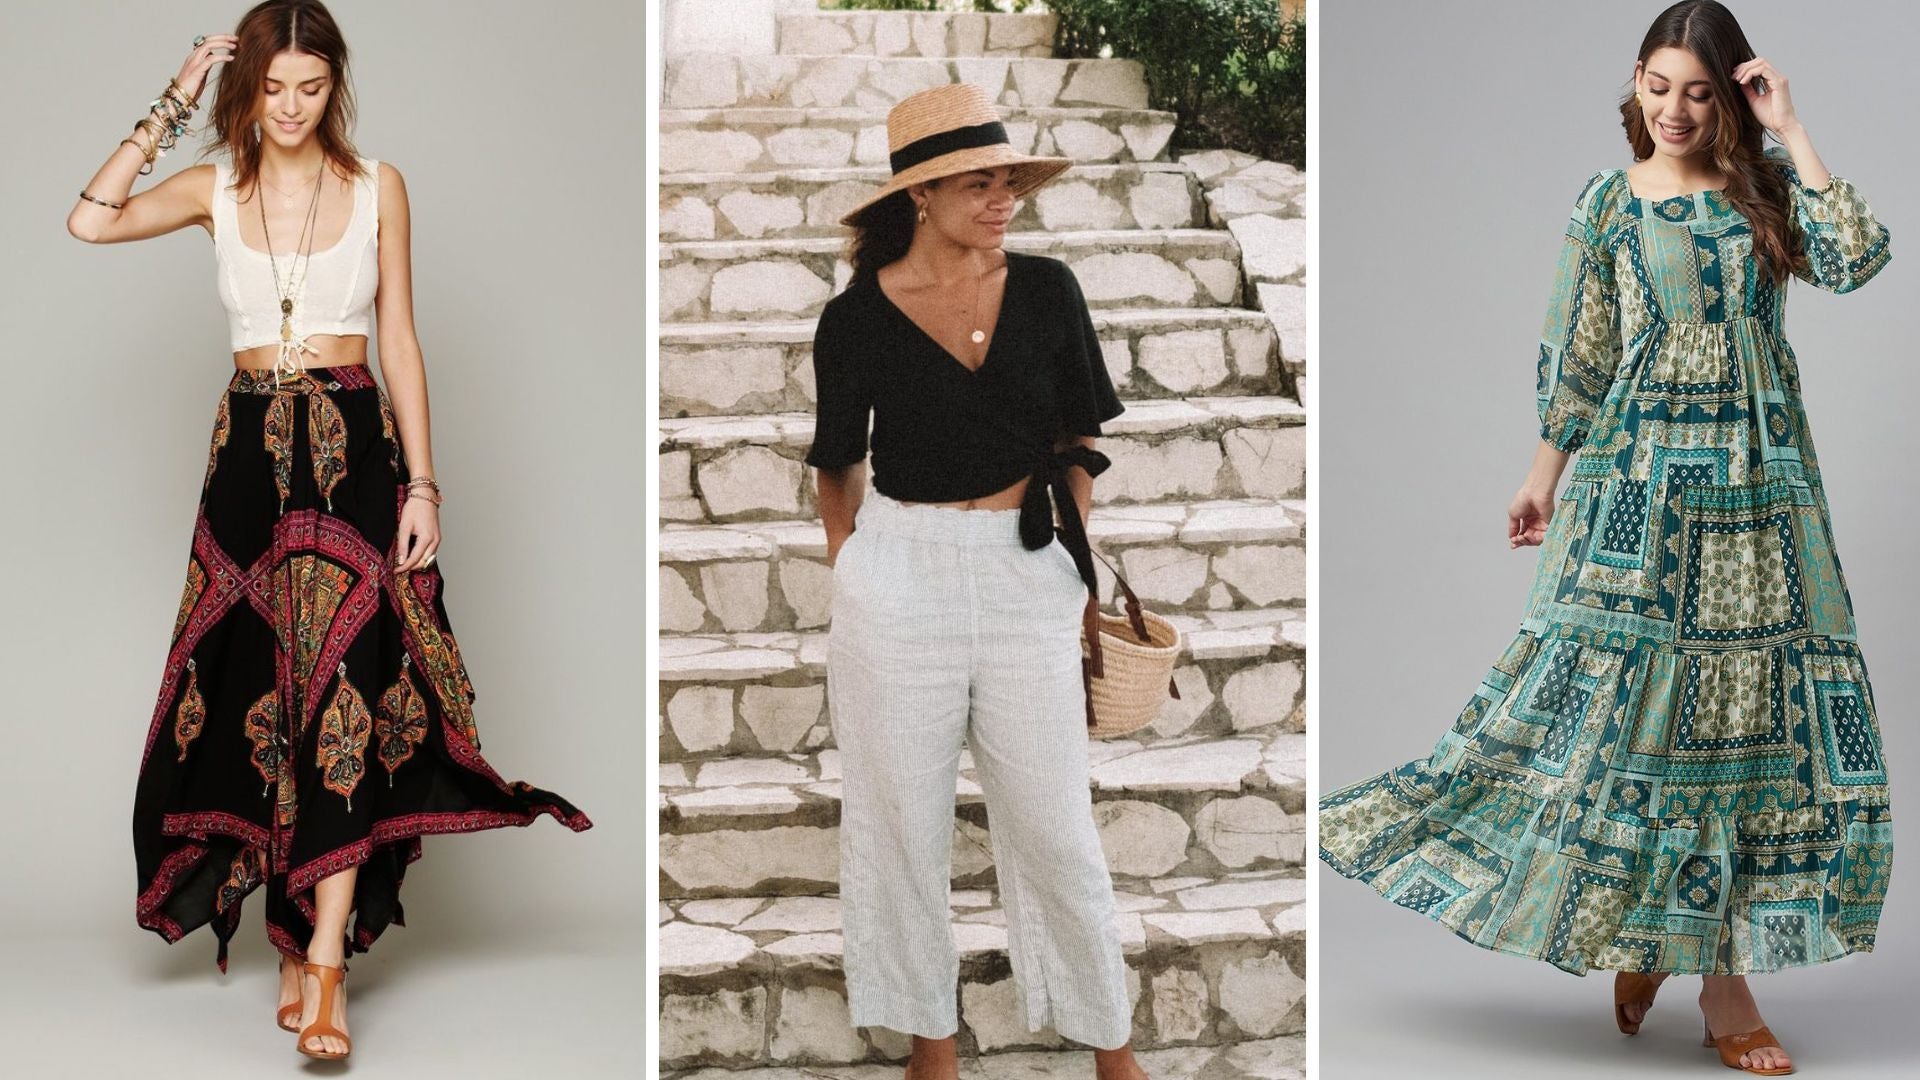 Beat The Heat Cool And Edgy Outfits For Summer Festivals